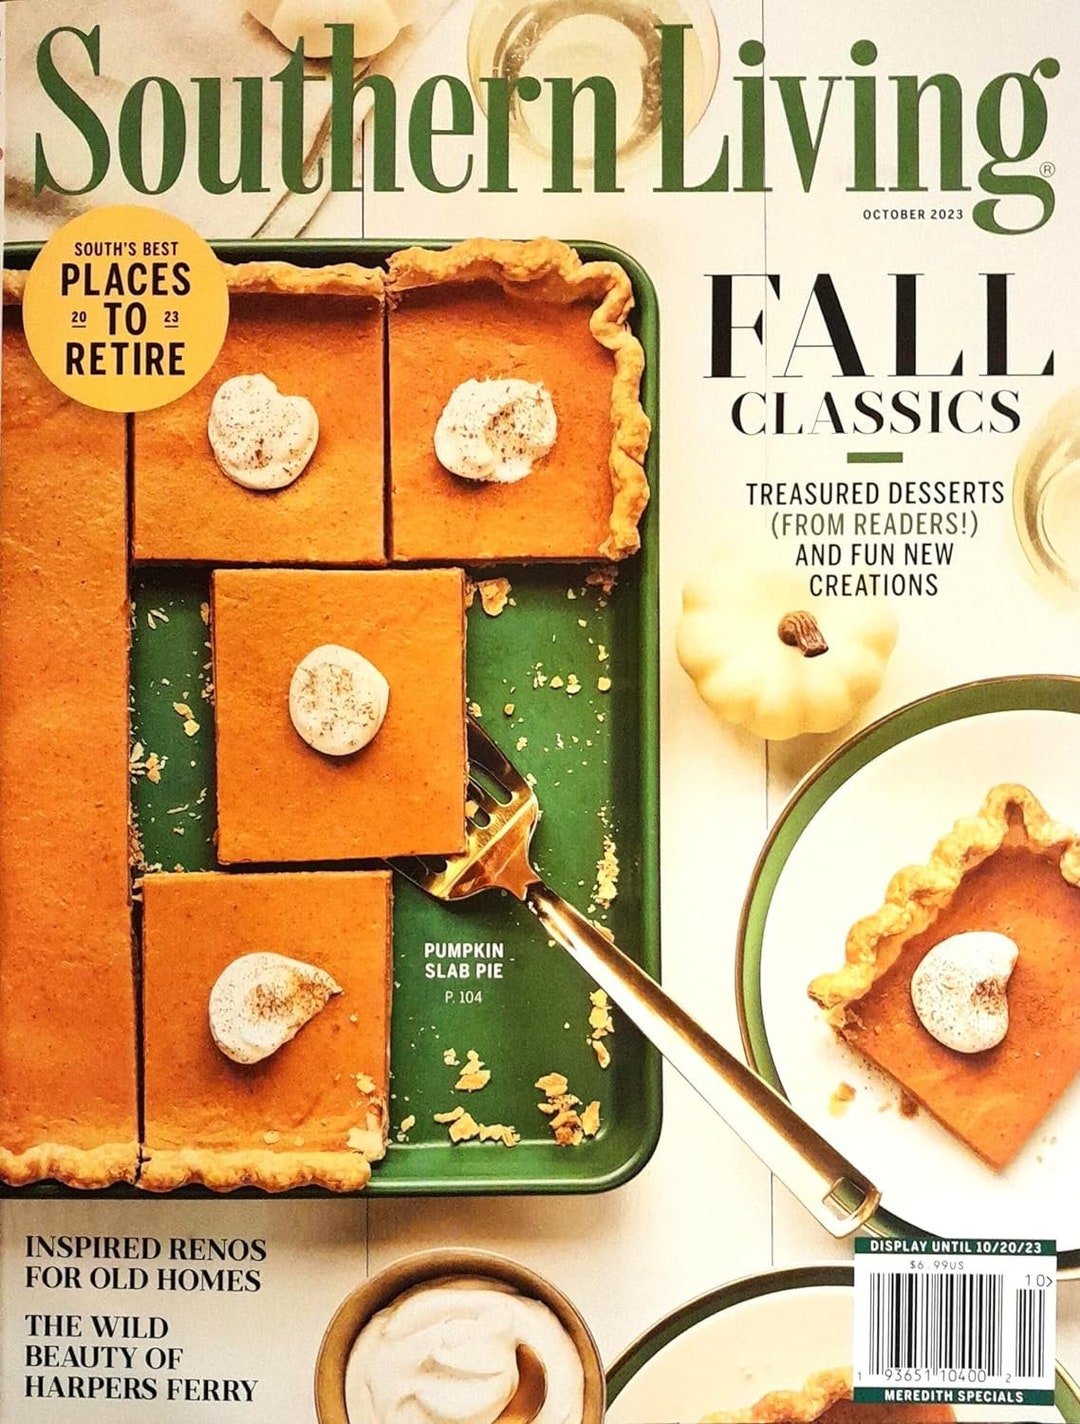 SOUTHERN Living Magazine October Fall 2023 - Etsy